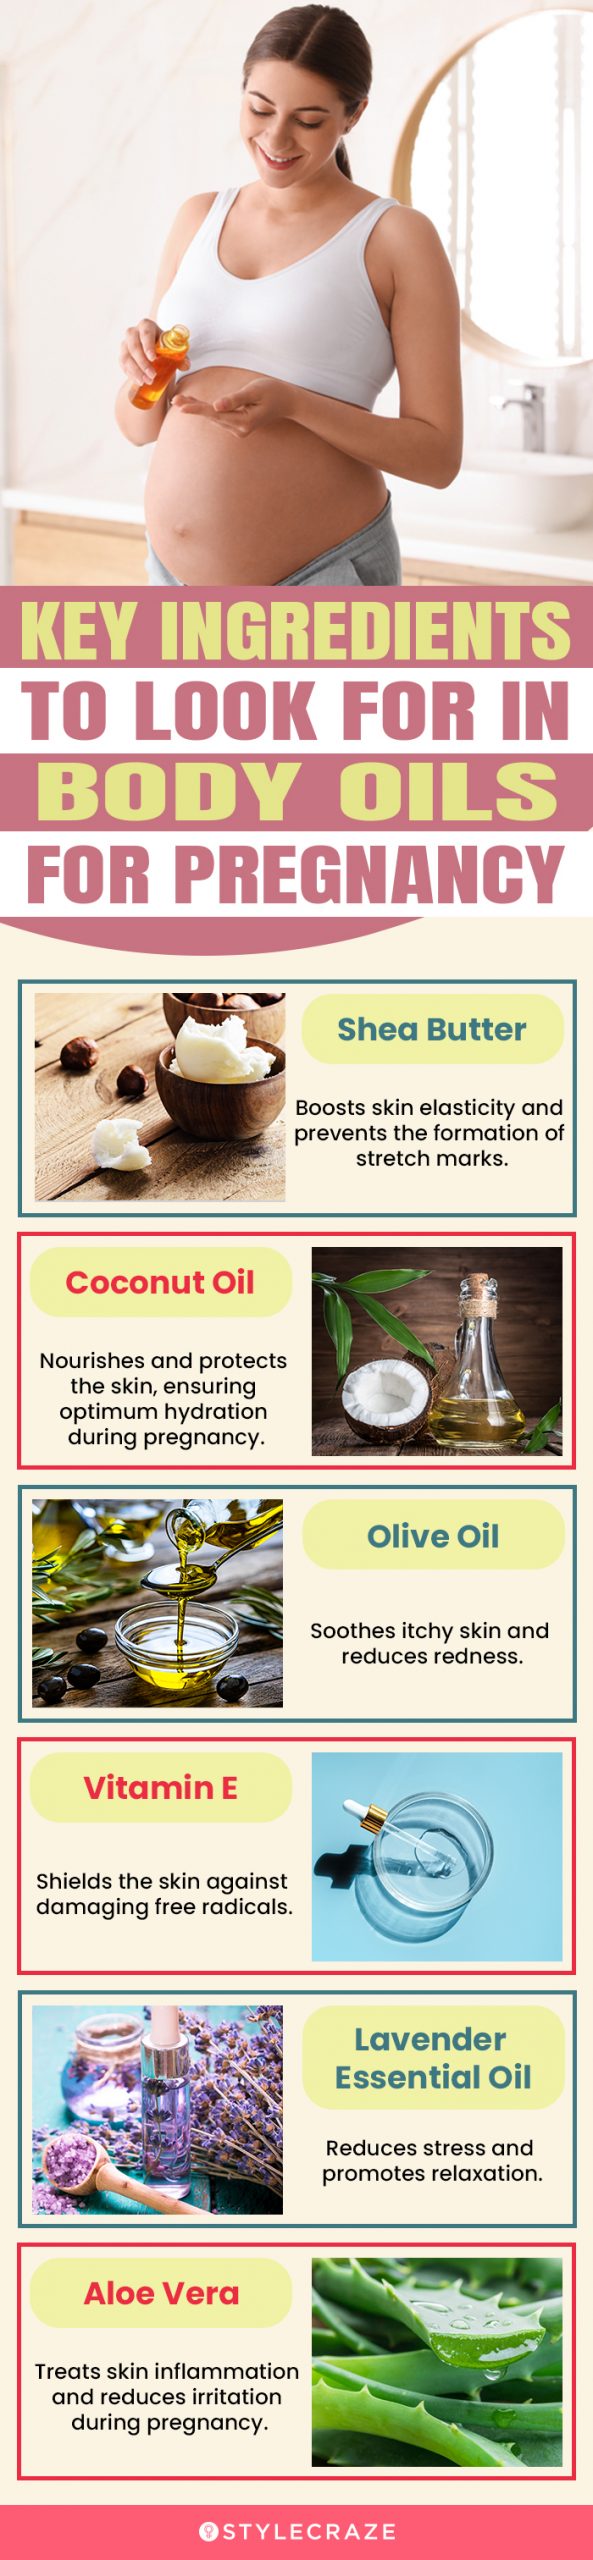 Key Ingredients To Look For In Body Oils For Pregnancy (infographic)